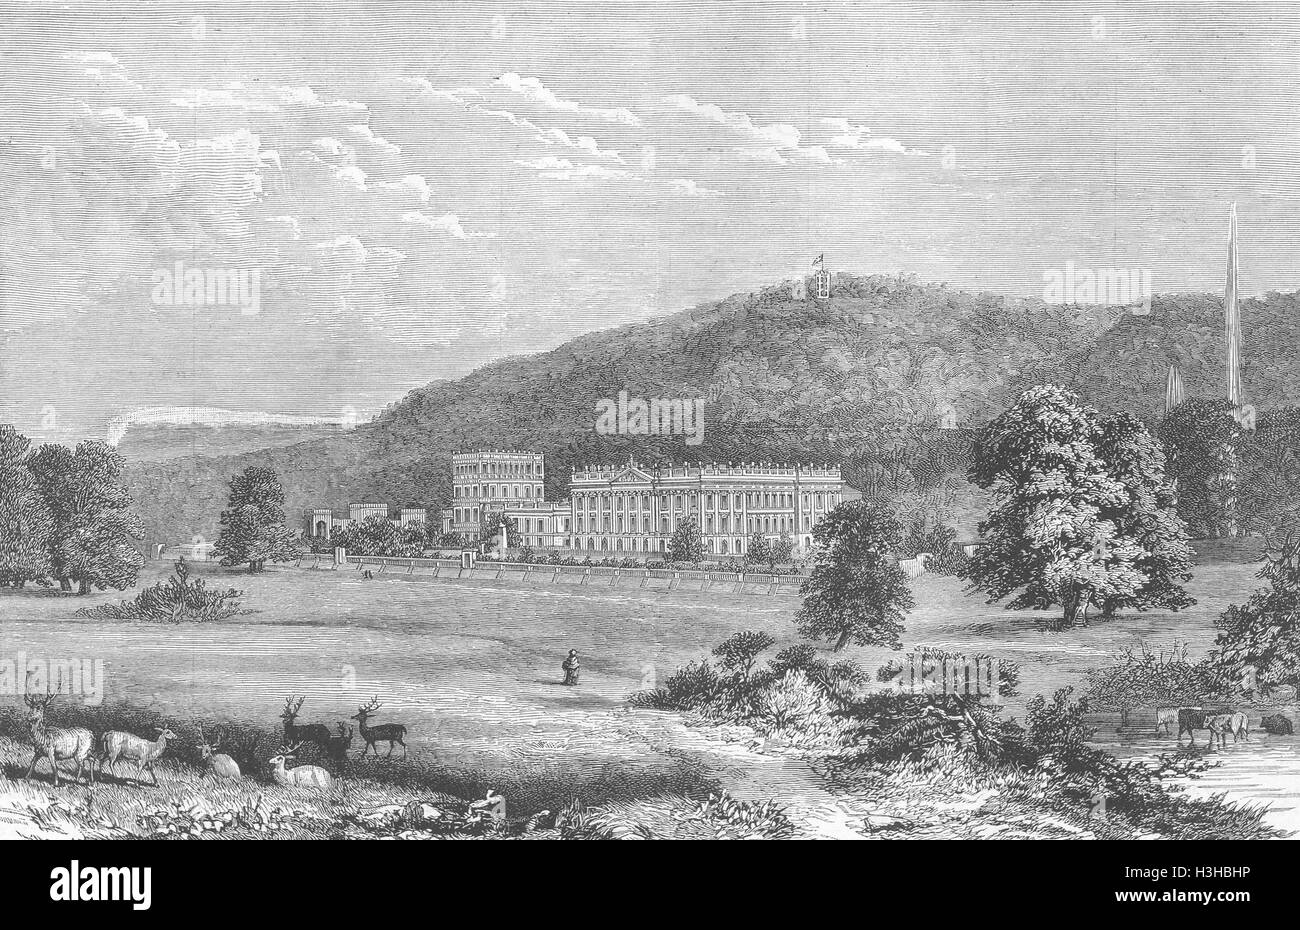 DERBYS Chatsworth House 1882. The Graphic Stock Photo